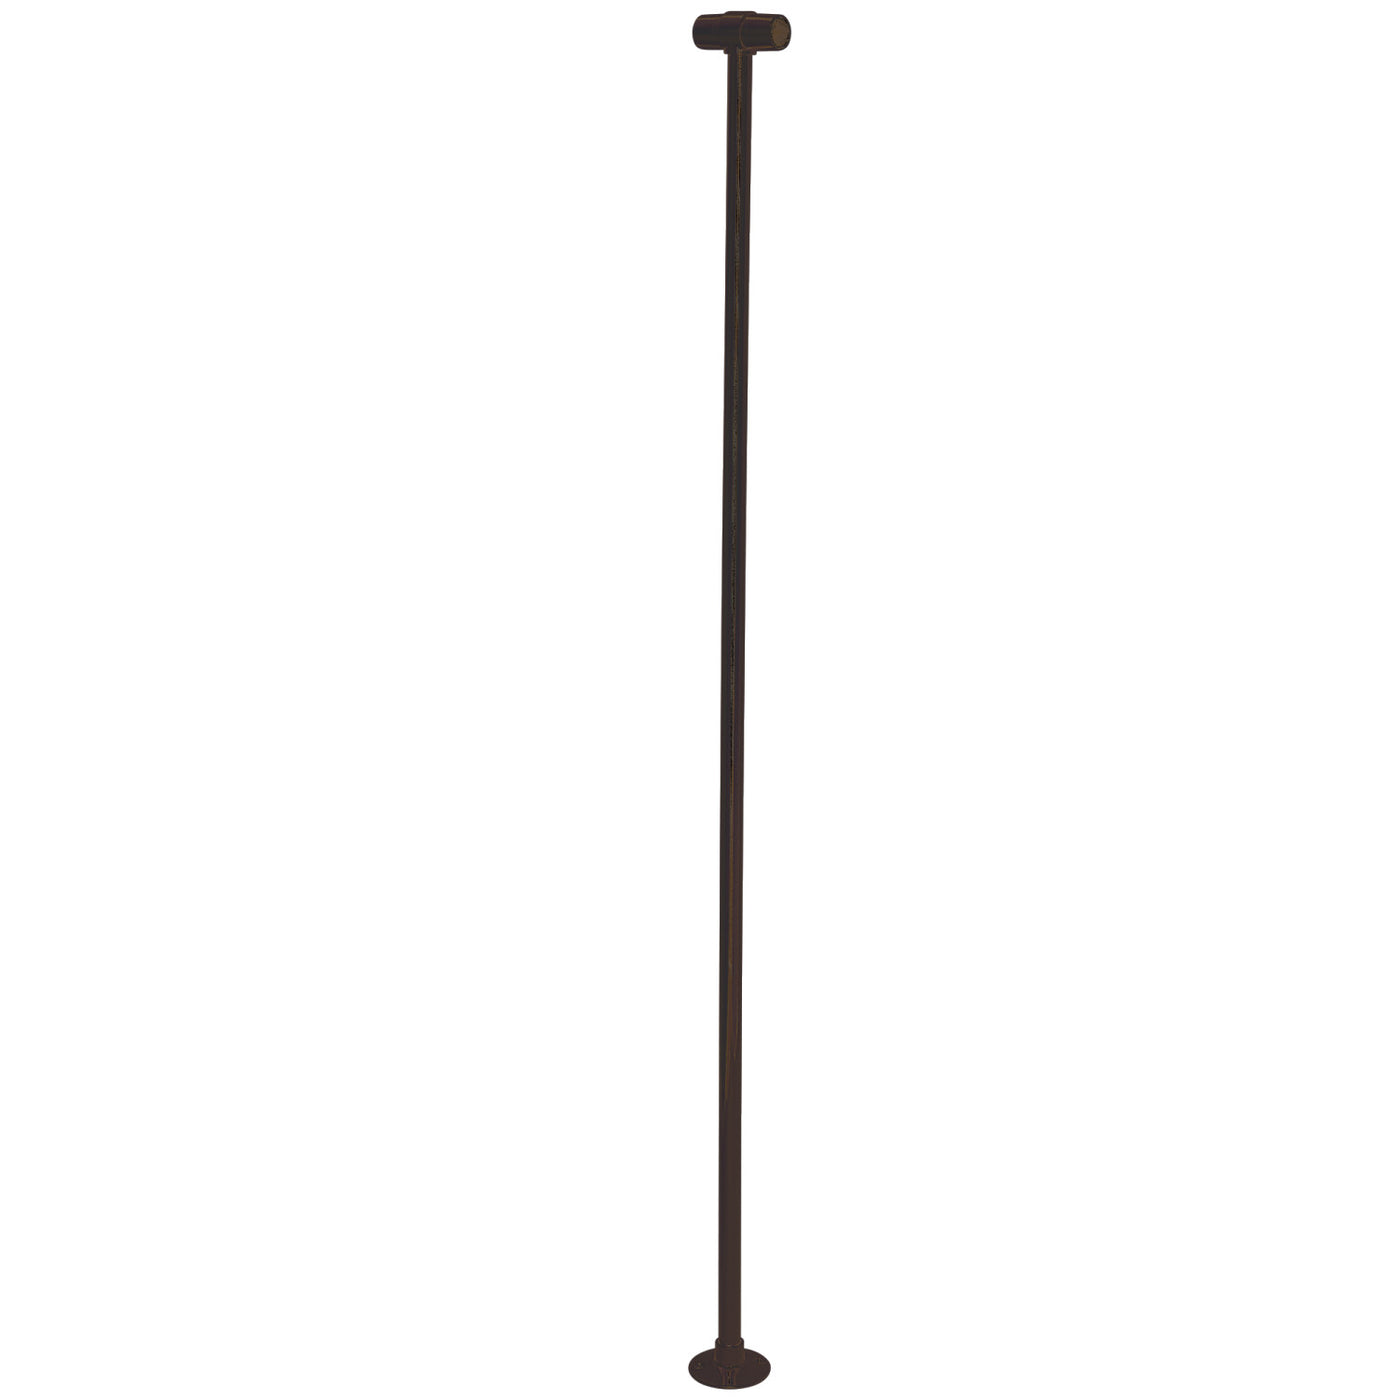 Elements of Design ED1042-5 Shower Curtain Rail Support, Oil Rubbed Bronze